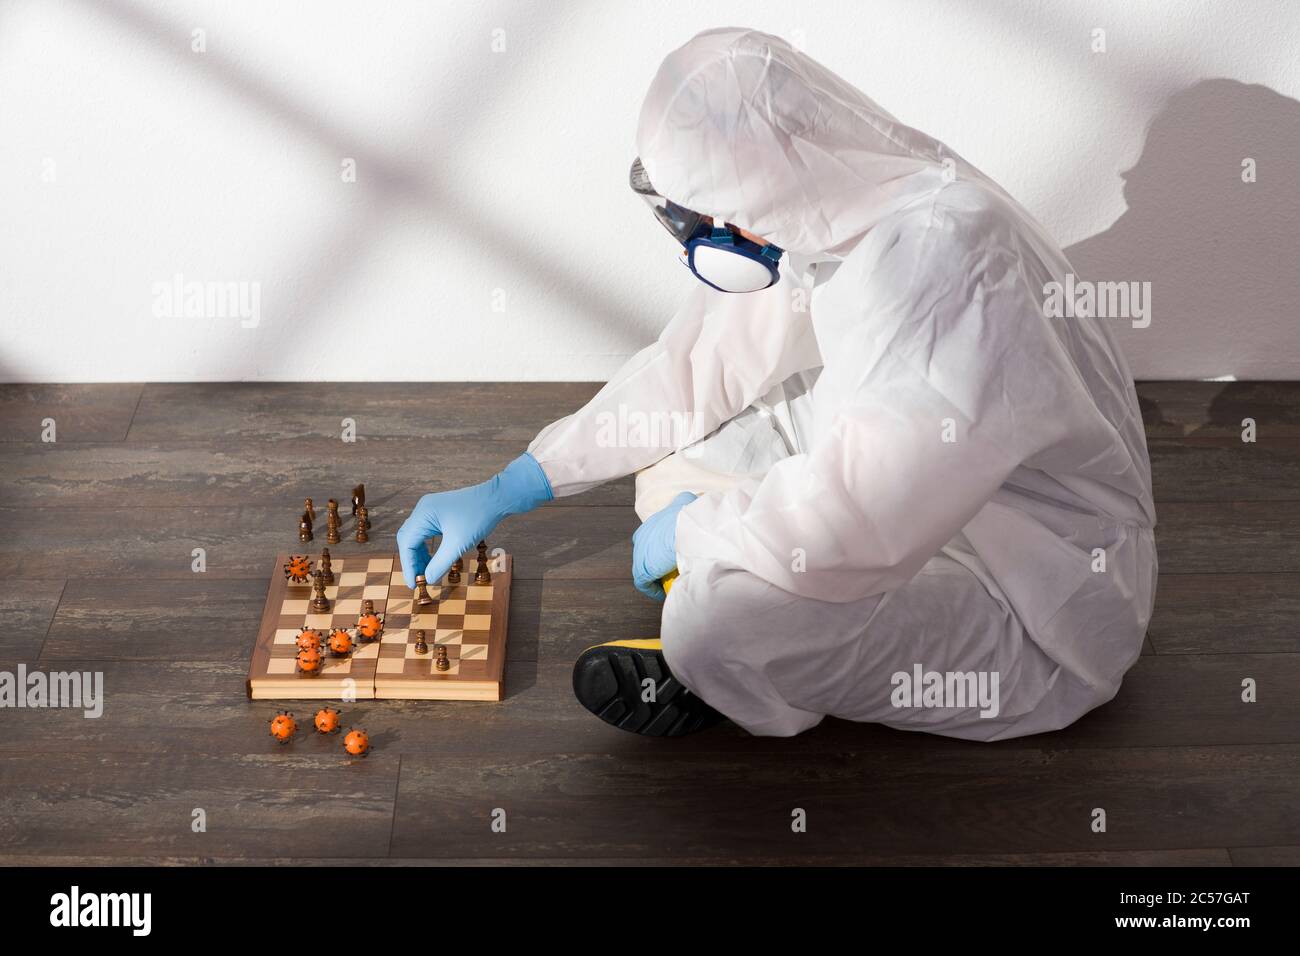 COVID-19, protective suit, chess, virus, strategy Stock Photo